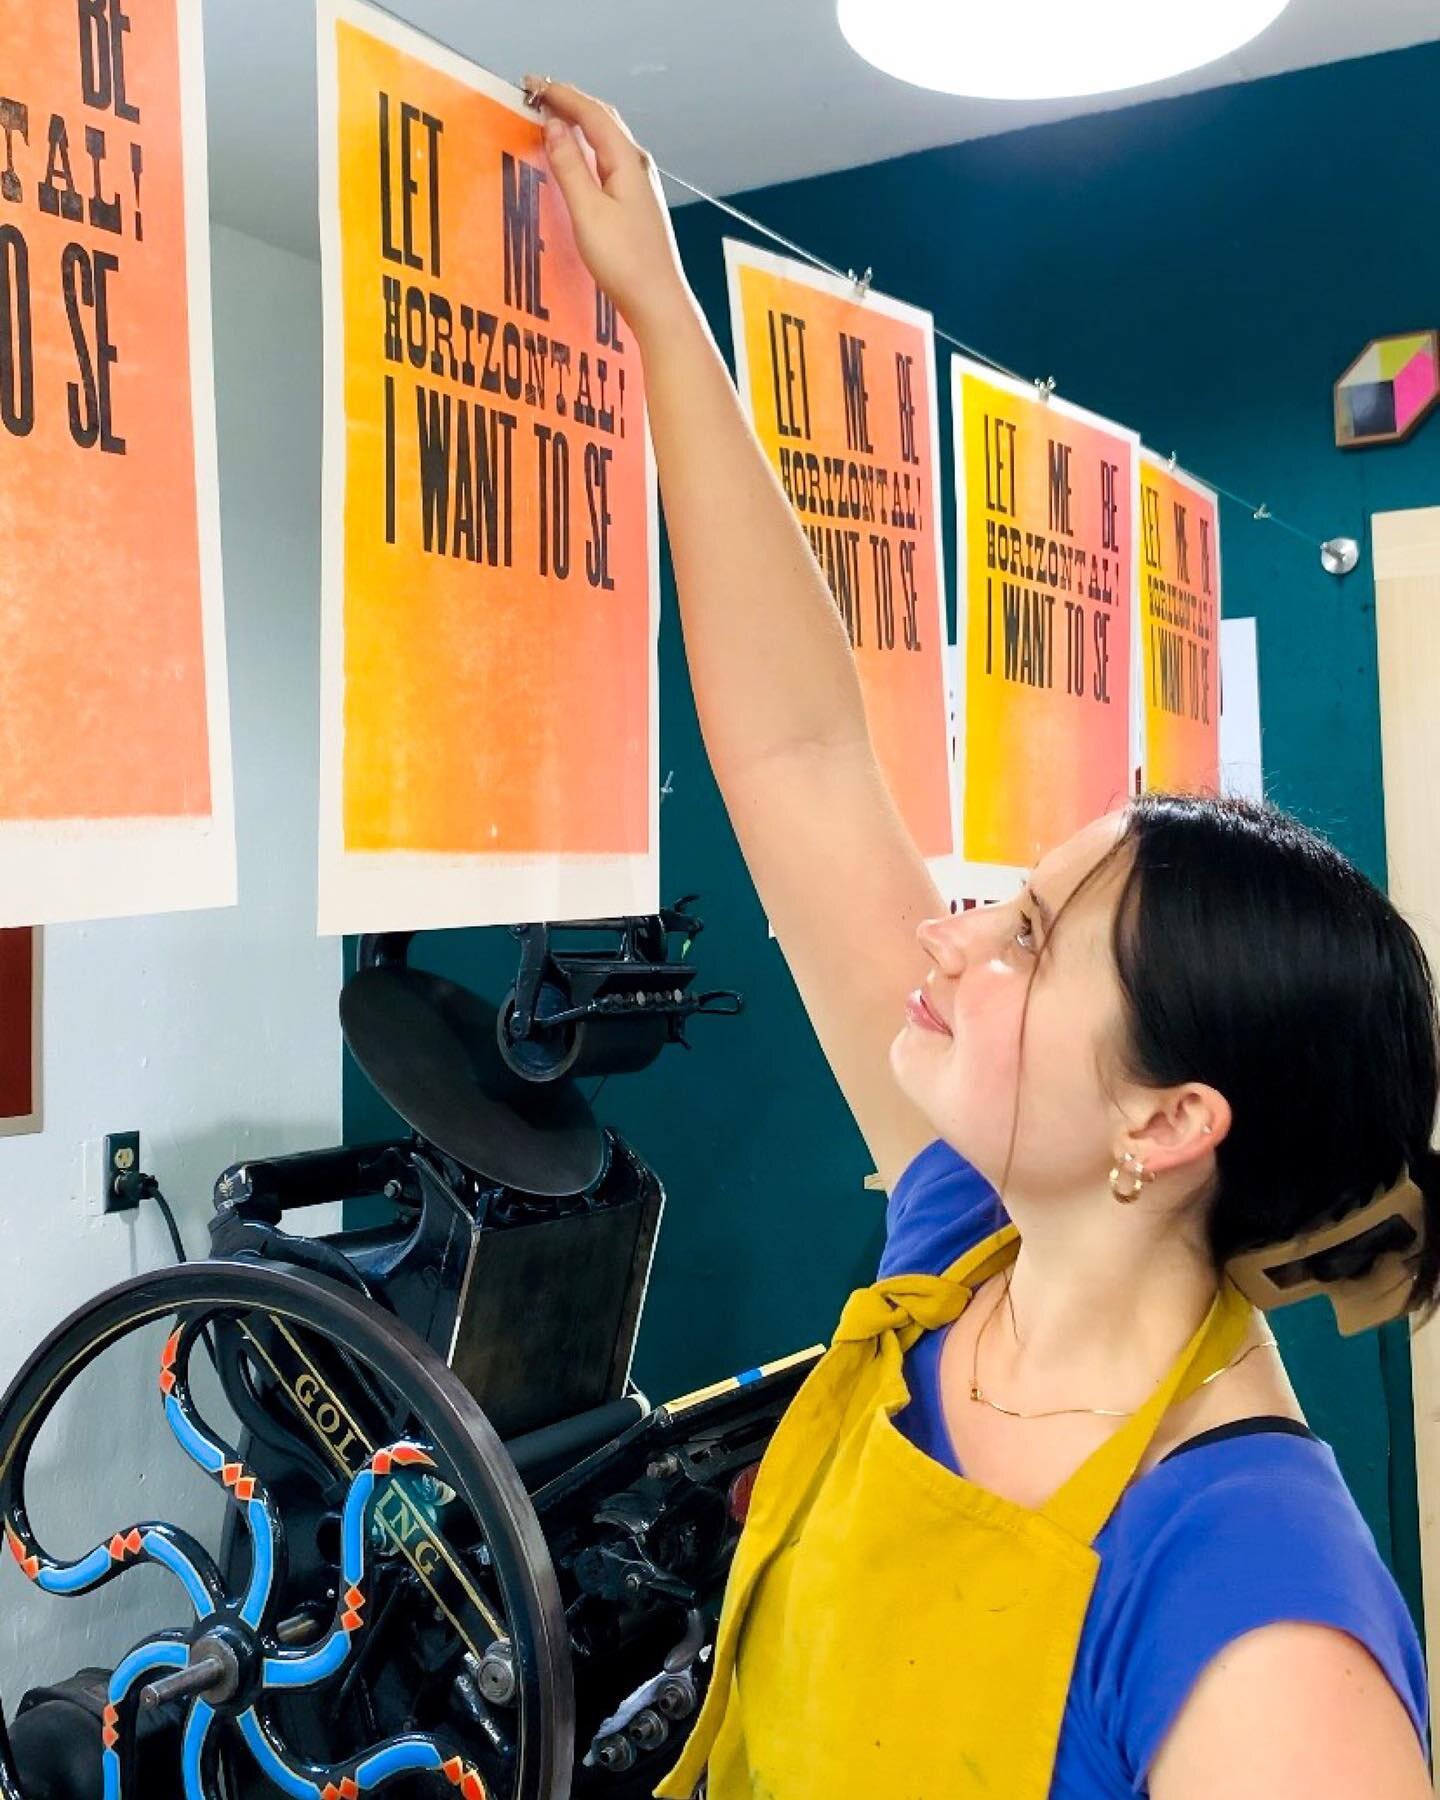 Lydia Hershauer @lydiahershauer has been printing up a storm on our Vandercook this week! Read more about Lydia below, and swipe to see more of her typographic work.

Lydia Hershauer is a graphic designer, printmaker, and photographer based in Detroi